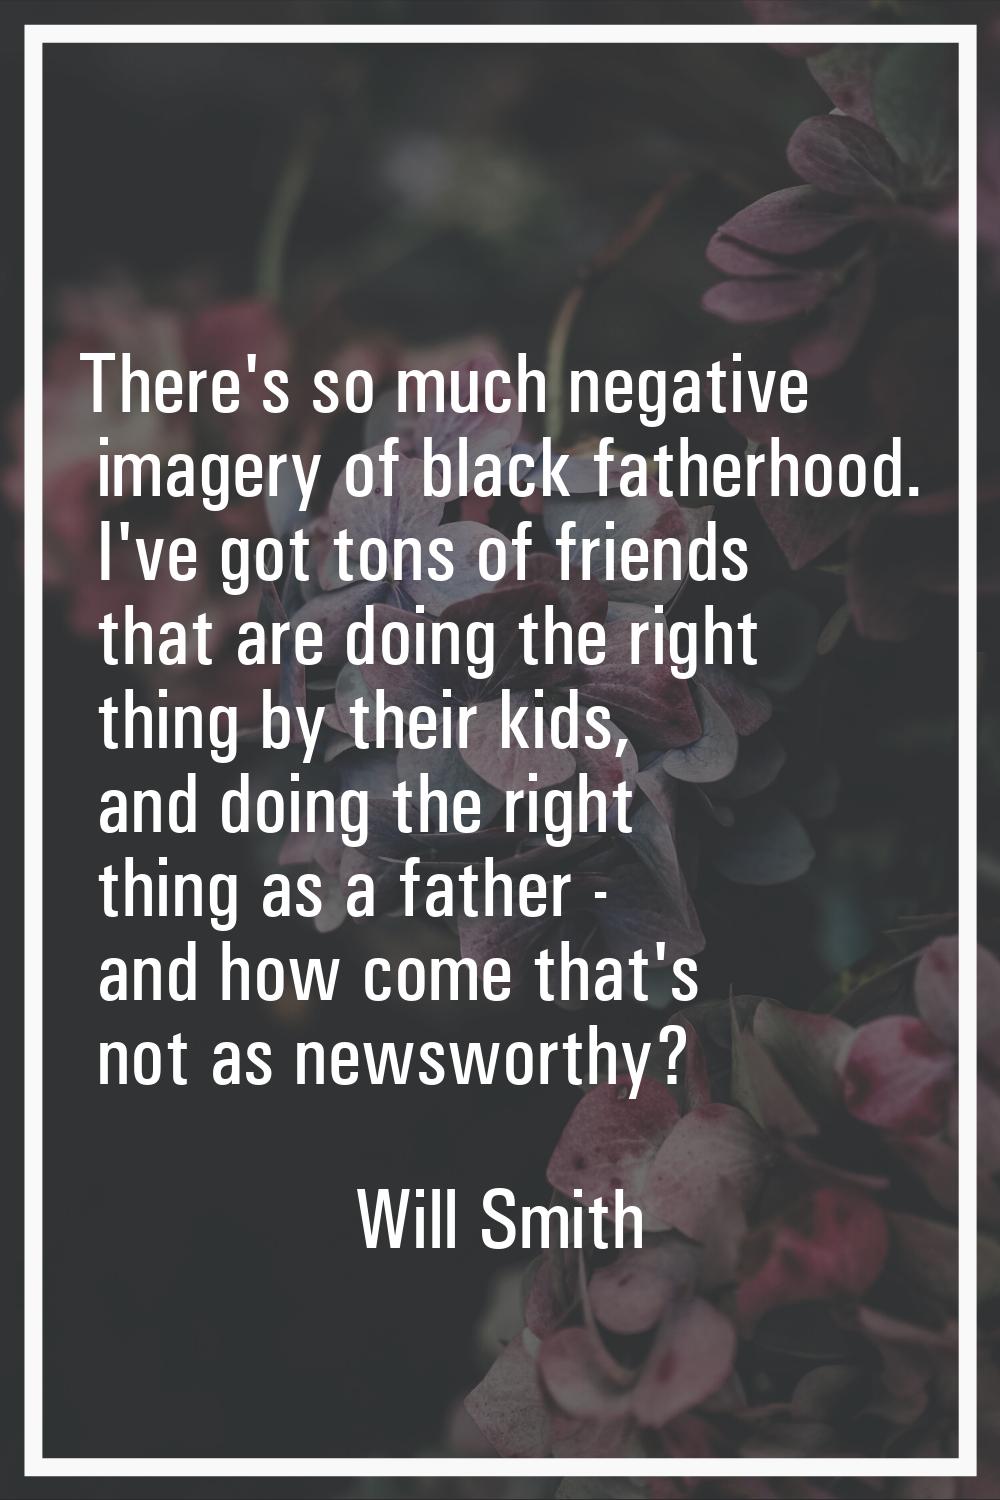 There's so much negative imagery of black fatherhood. I've got tons of friends that are doing the r